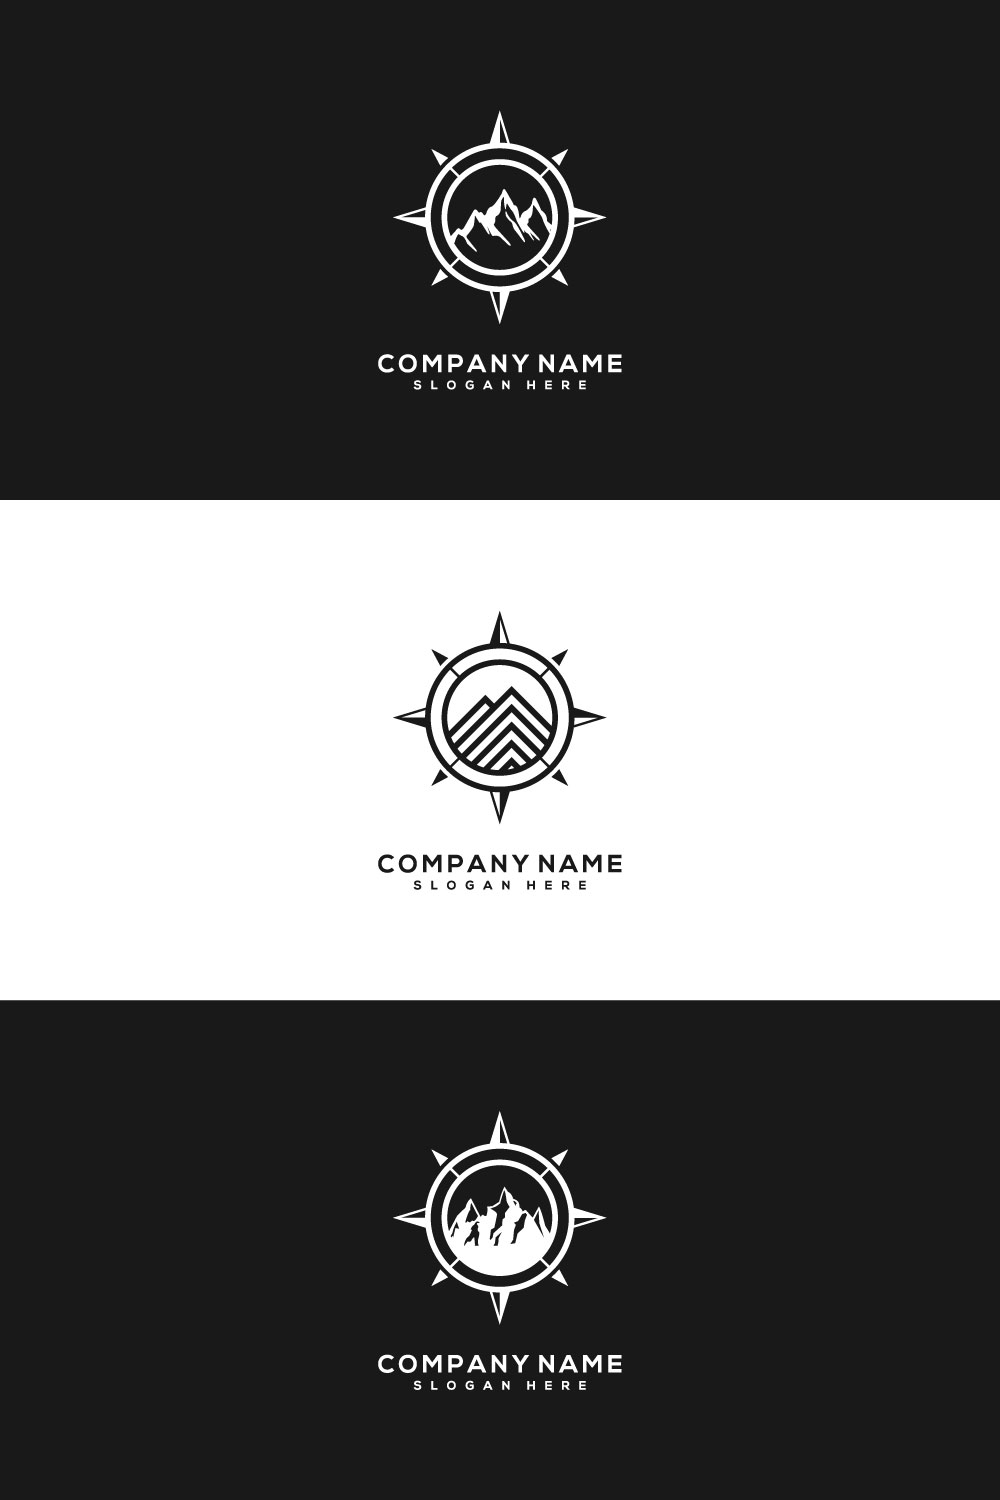 3 Mountain and Compass Concept Logo Designs pinteerst.